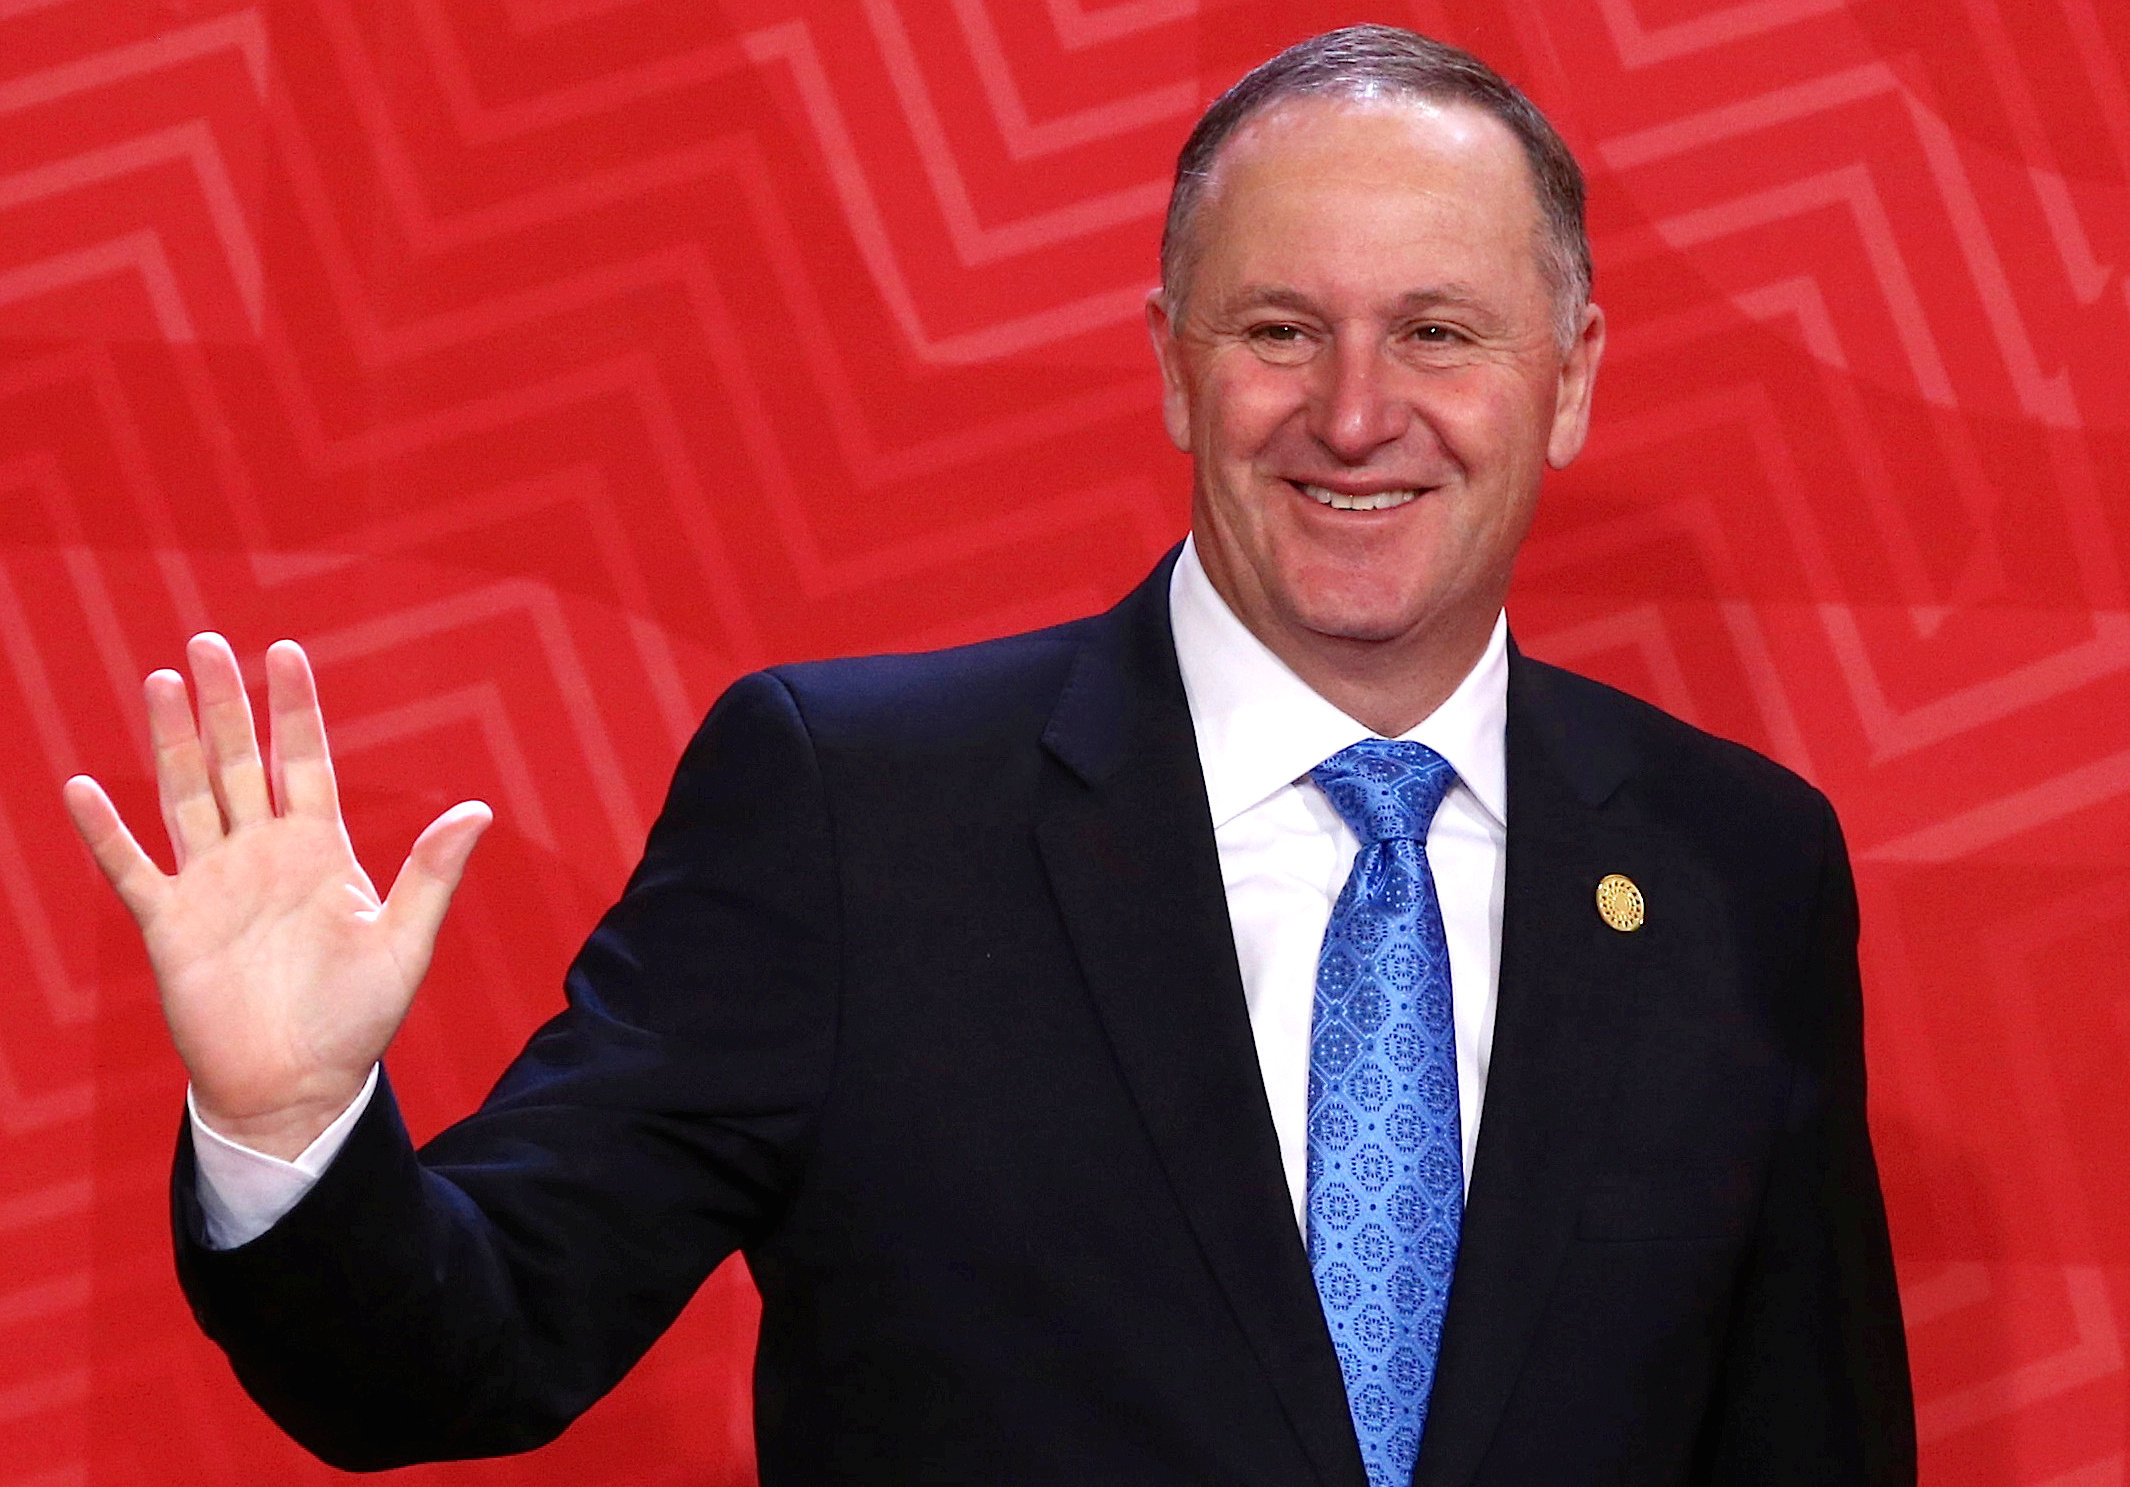 New Zealand's Prime Minister John Key waves to photographers during the APEC (Asia-Pacific Economic Cooperation) Summit in Lima, Peru, November 20, 2016. REUTERS/Mariana Bazo/File photon